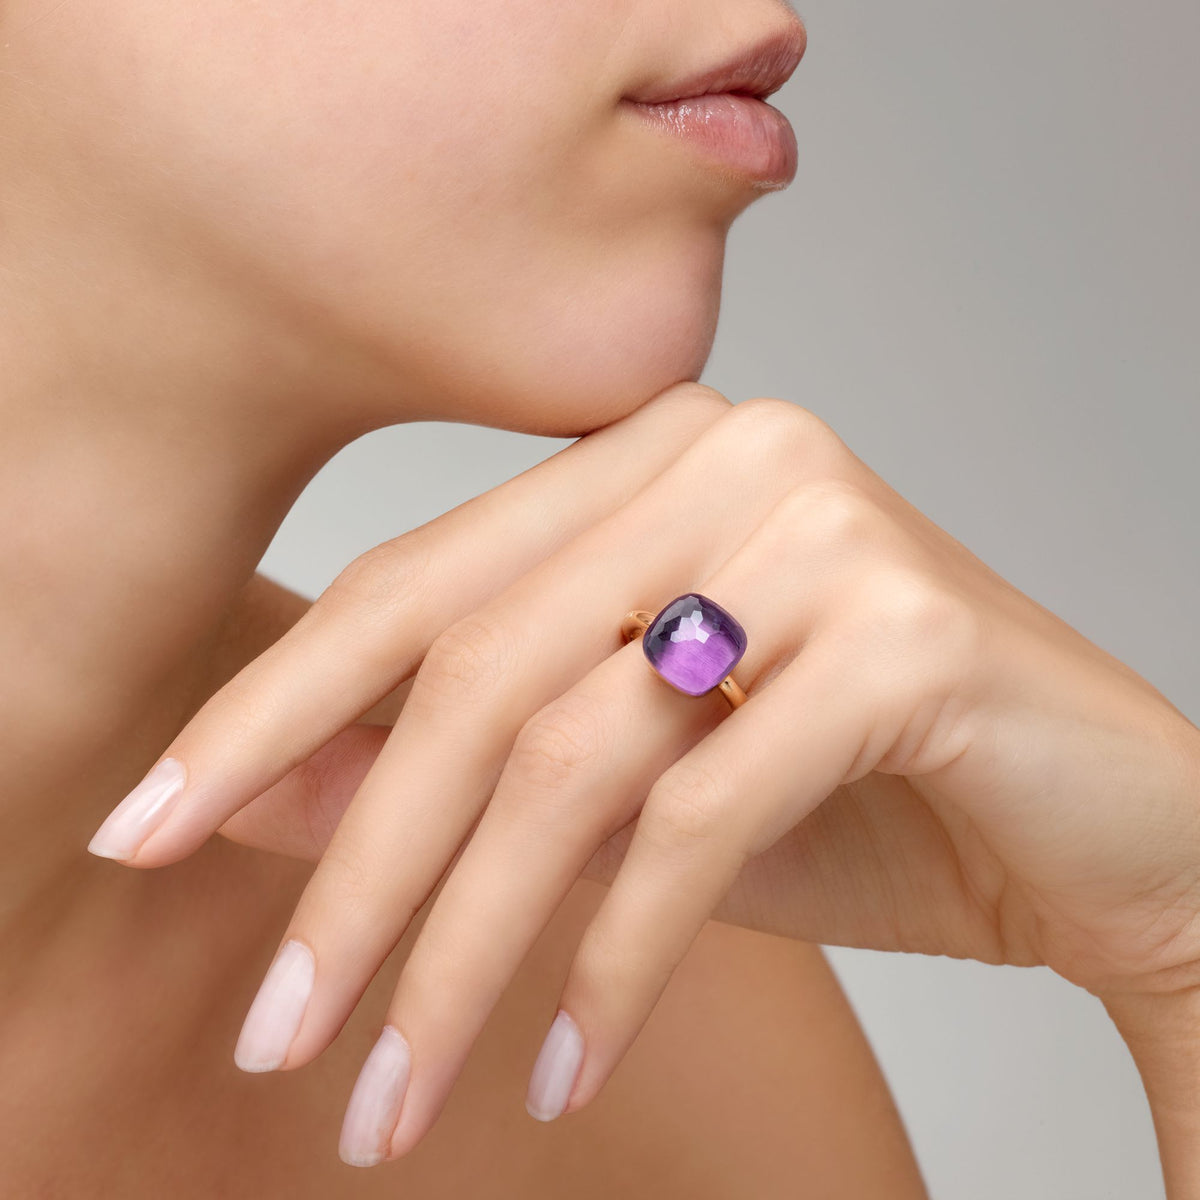 Nudo Maxi Ring in 18k Rose Gold and White Gold with Amethyst - Orsini Jewellers NZ